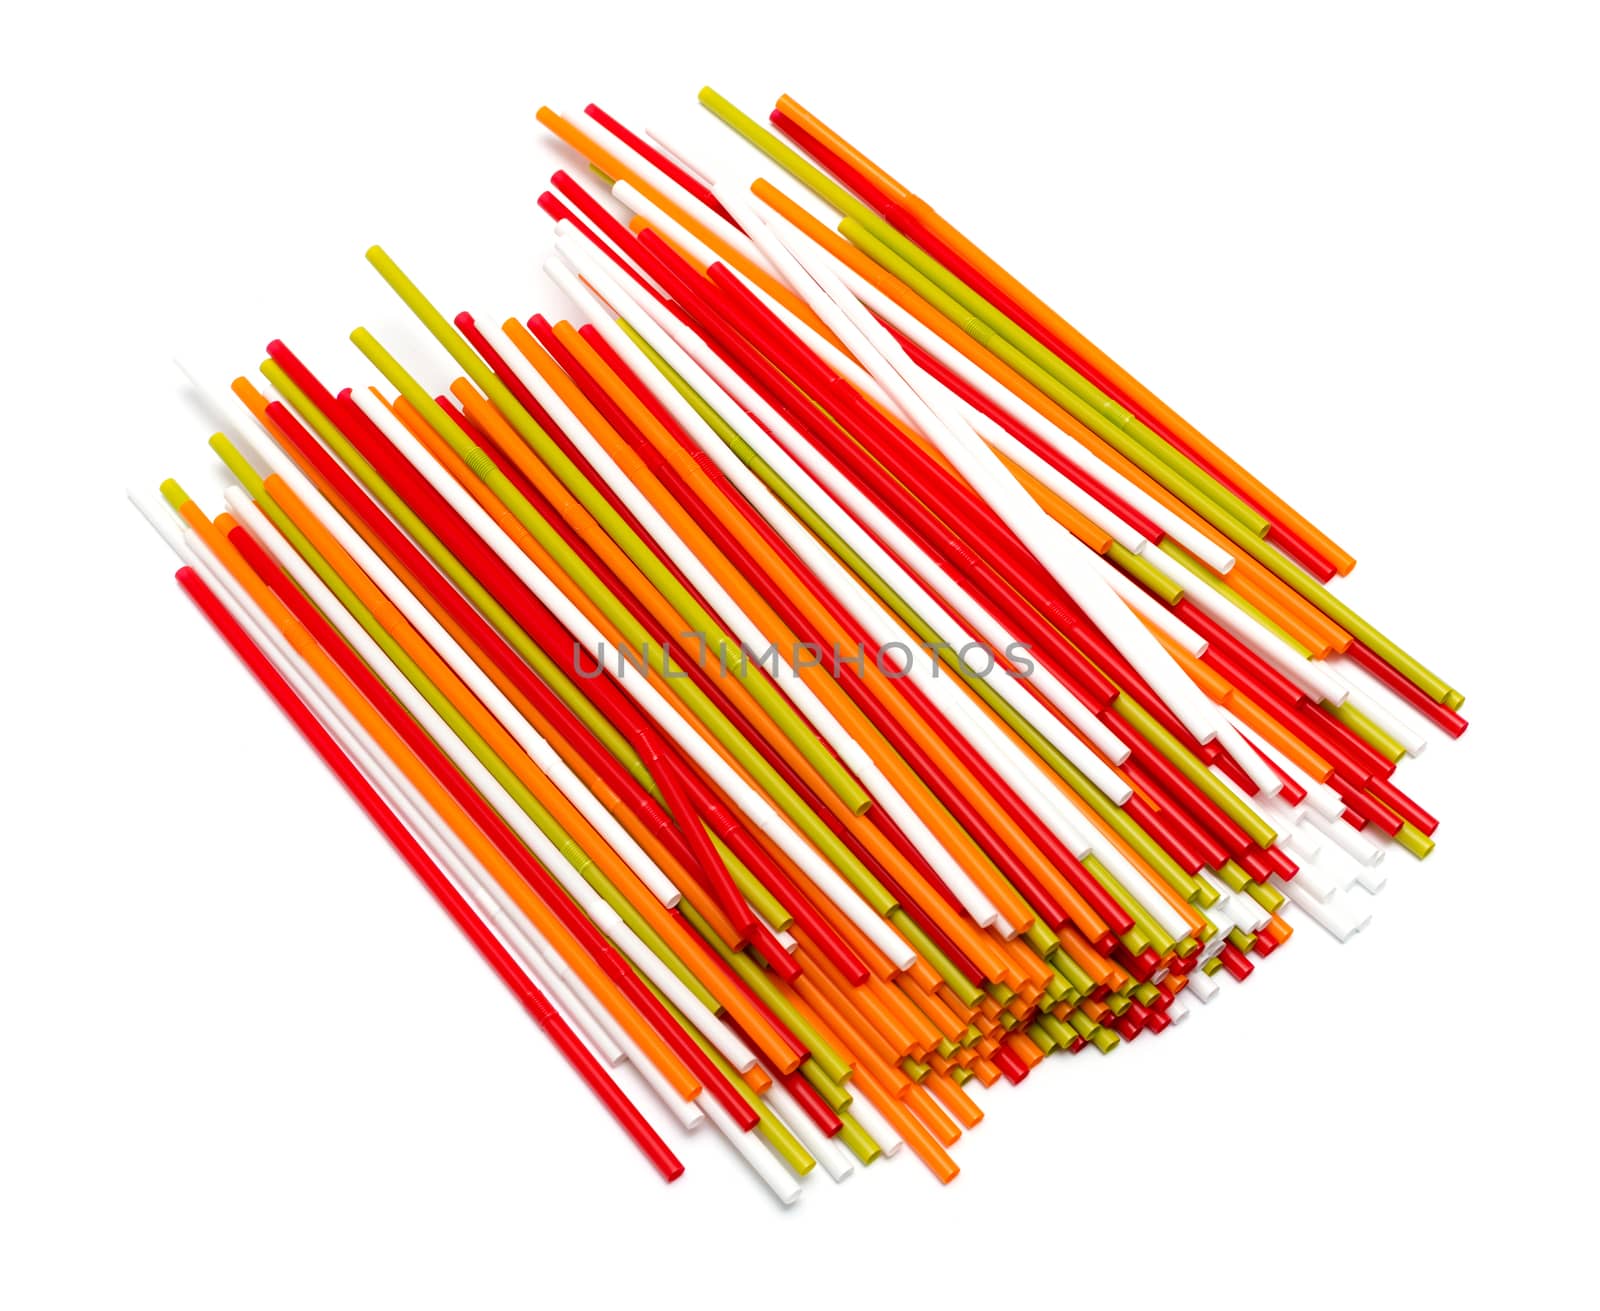 Colorful straws on white background